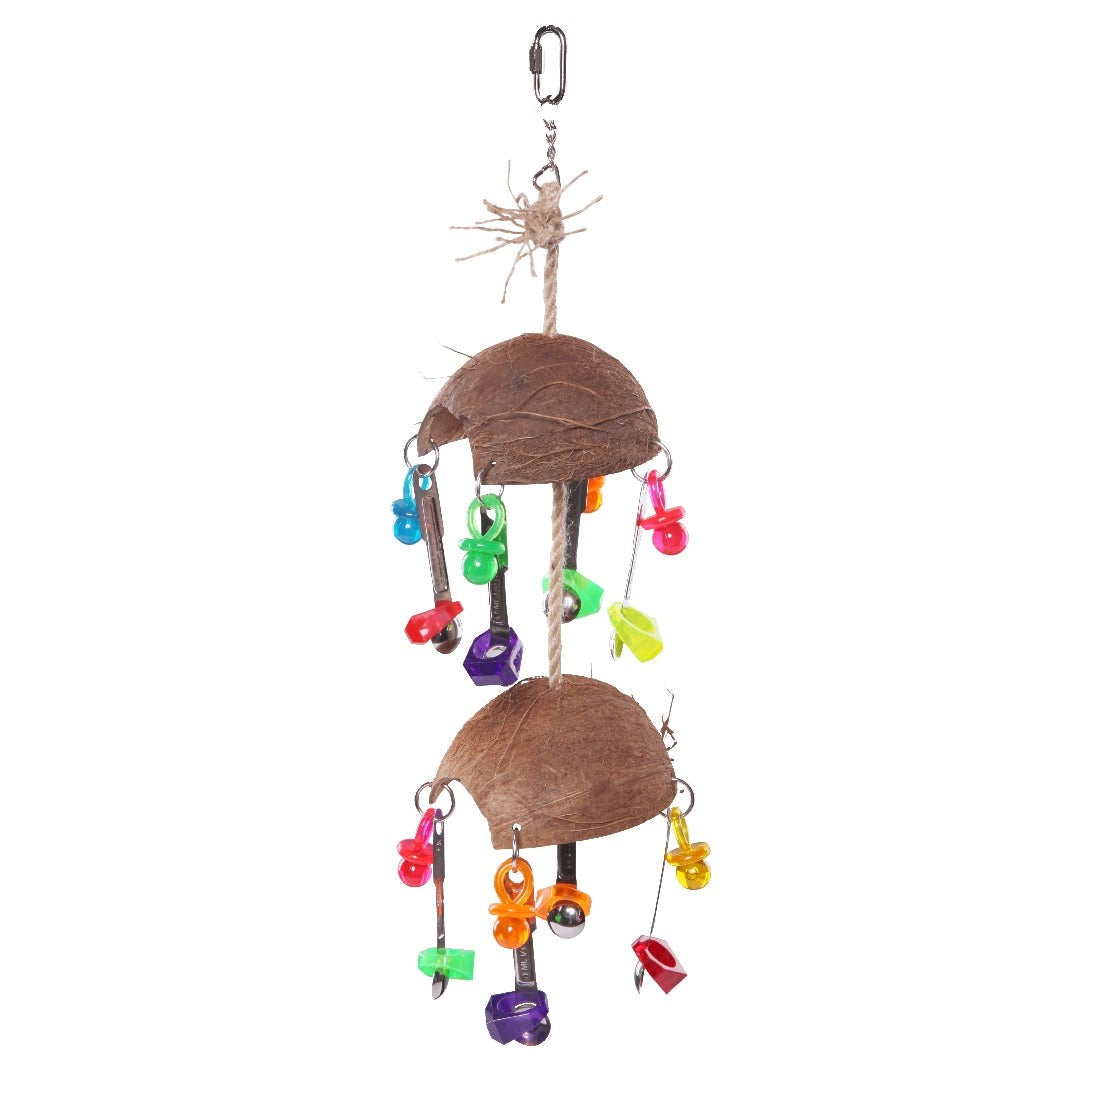 Colorful hanging coconut shells bird toy with beads and bells.